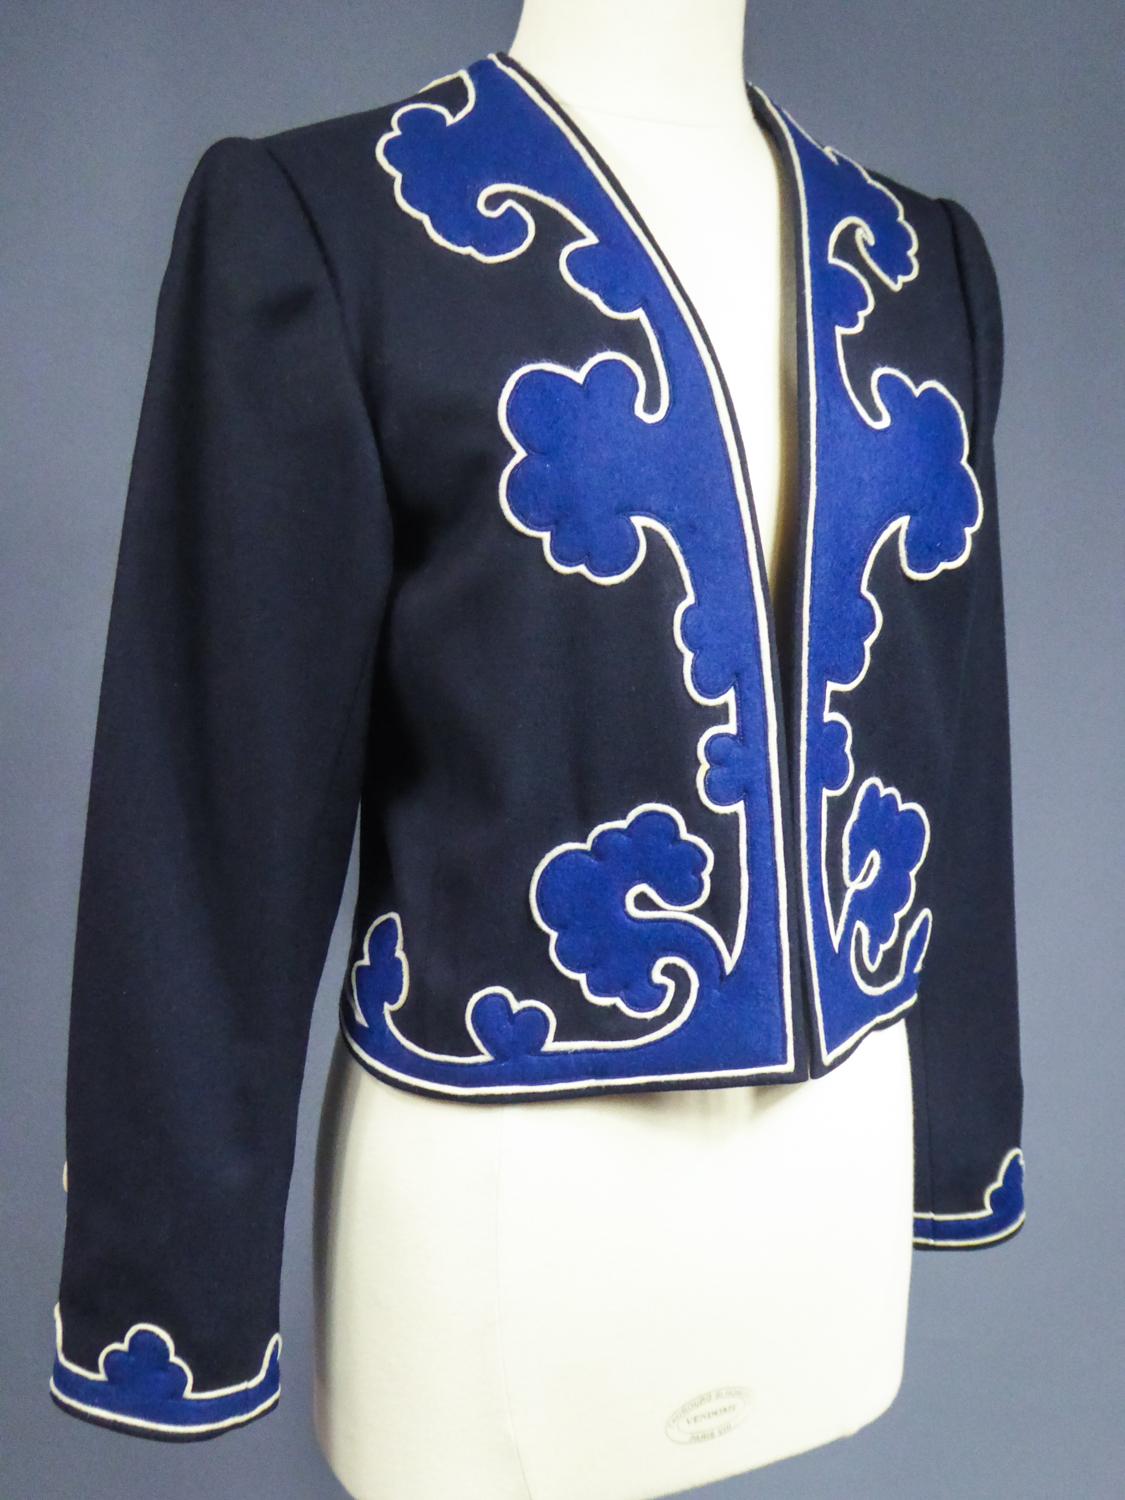 Circa 1979/1980
France

Yves Saint Laurent Rive Gauche bolero jacket from the famous collection 